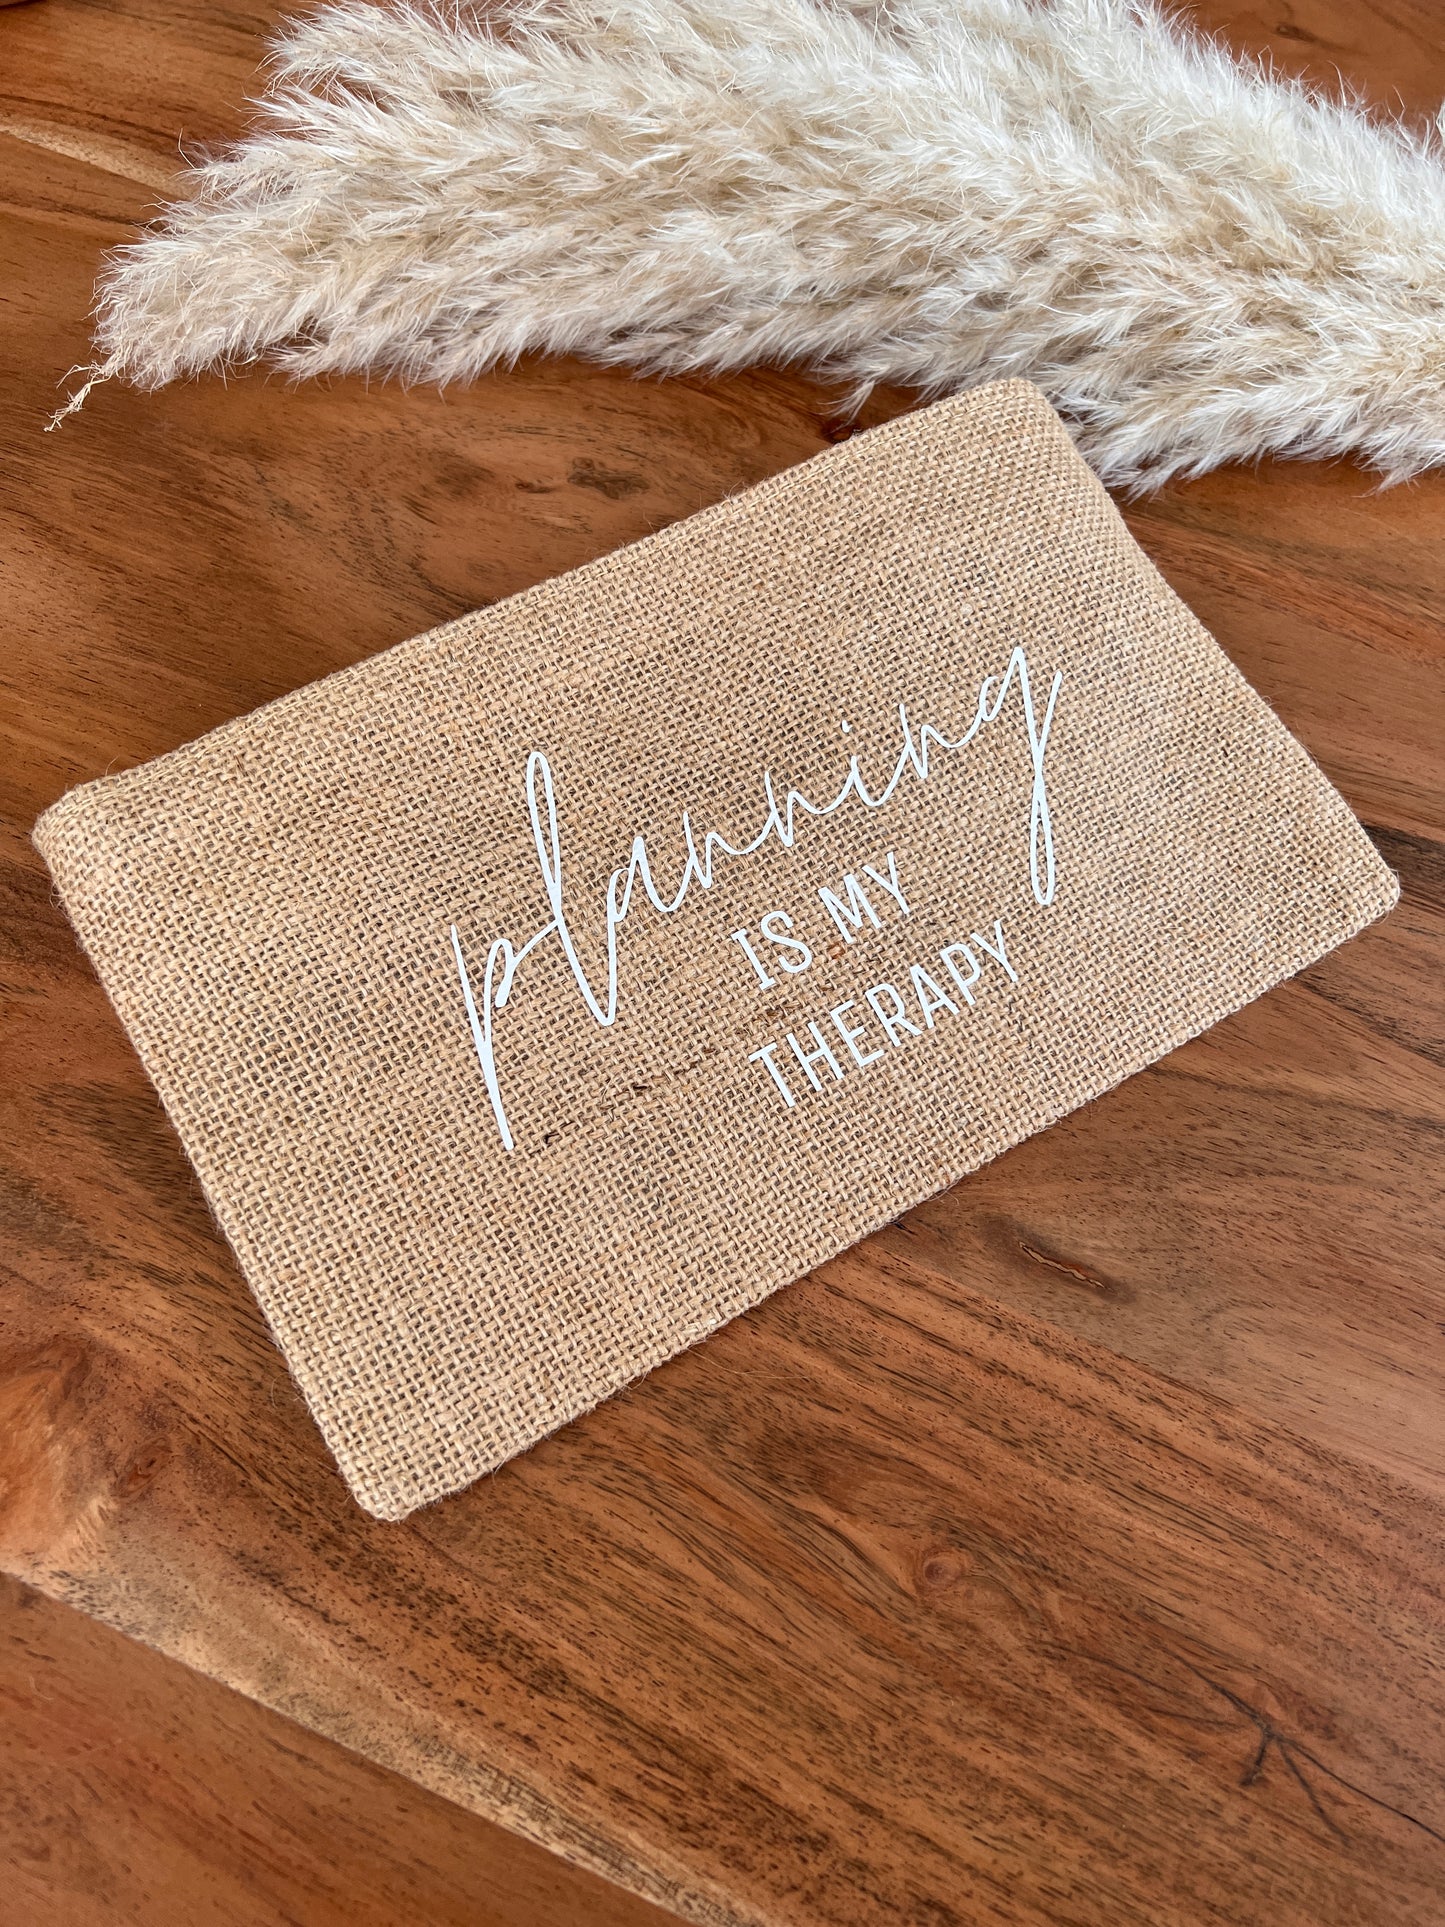 Jute Pen Pouch • "Planning is my therapy"